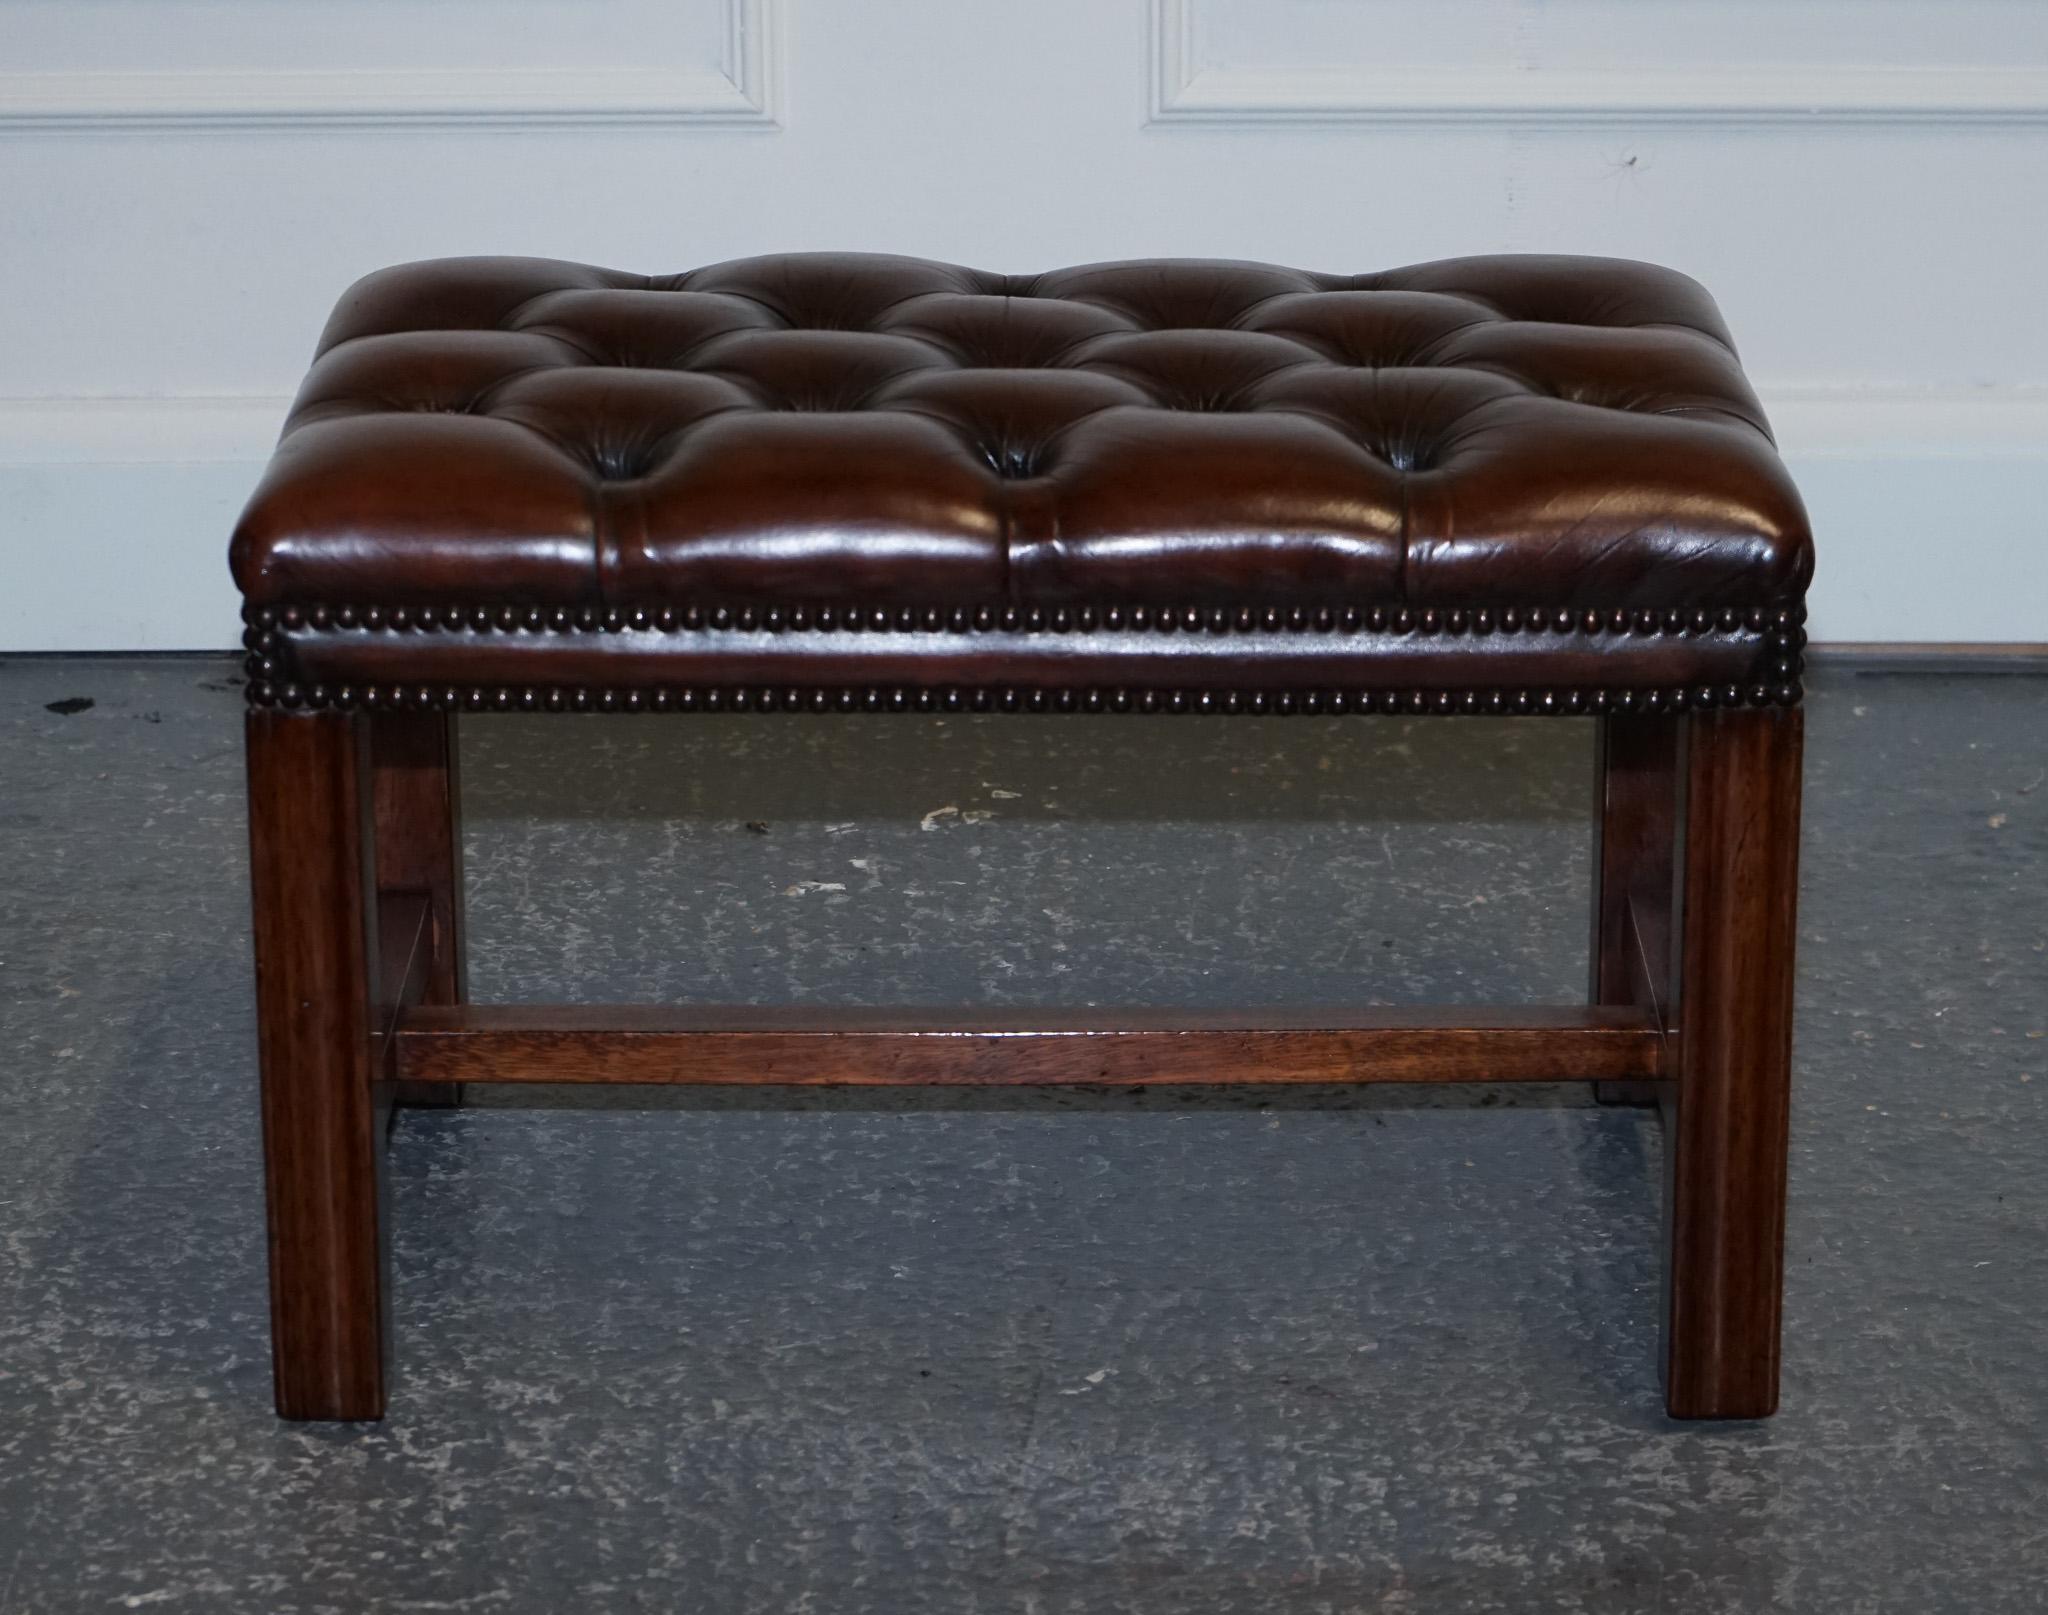 
We are delighted to offer for sale this Gorgeous Vintage Georgian Style Hand Dyed Leather Tuffed Footstool.

A very good looking and well made stool, it has been hand dyed this nice whiskey brown colour, the leather is held in place with vintage